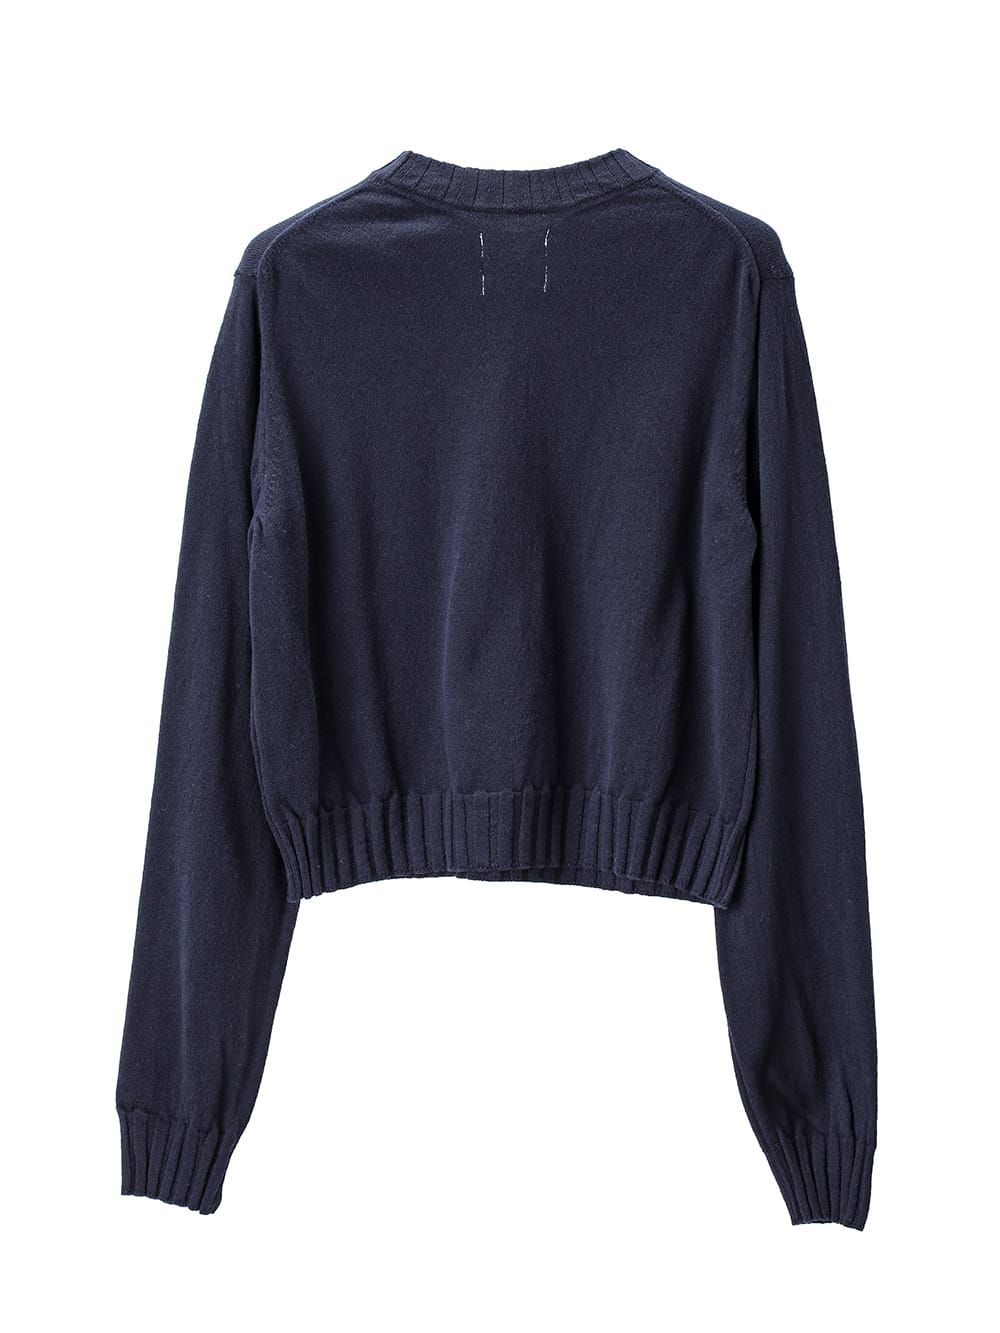 sk.0002bAW23-midnight lambs wool cropped crewneck sweater. THE TWO 